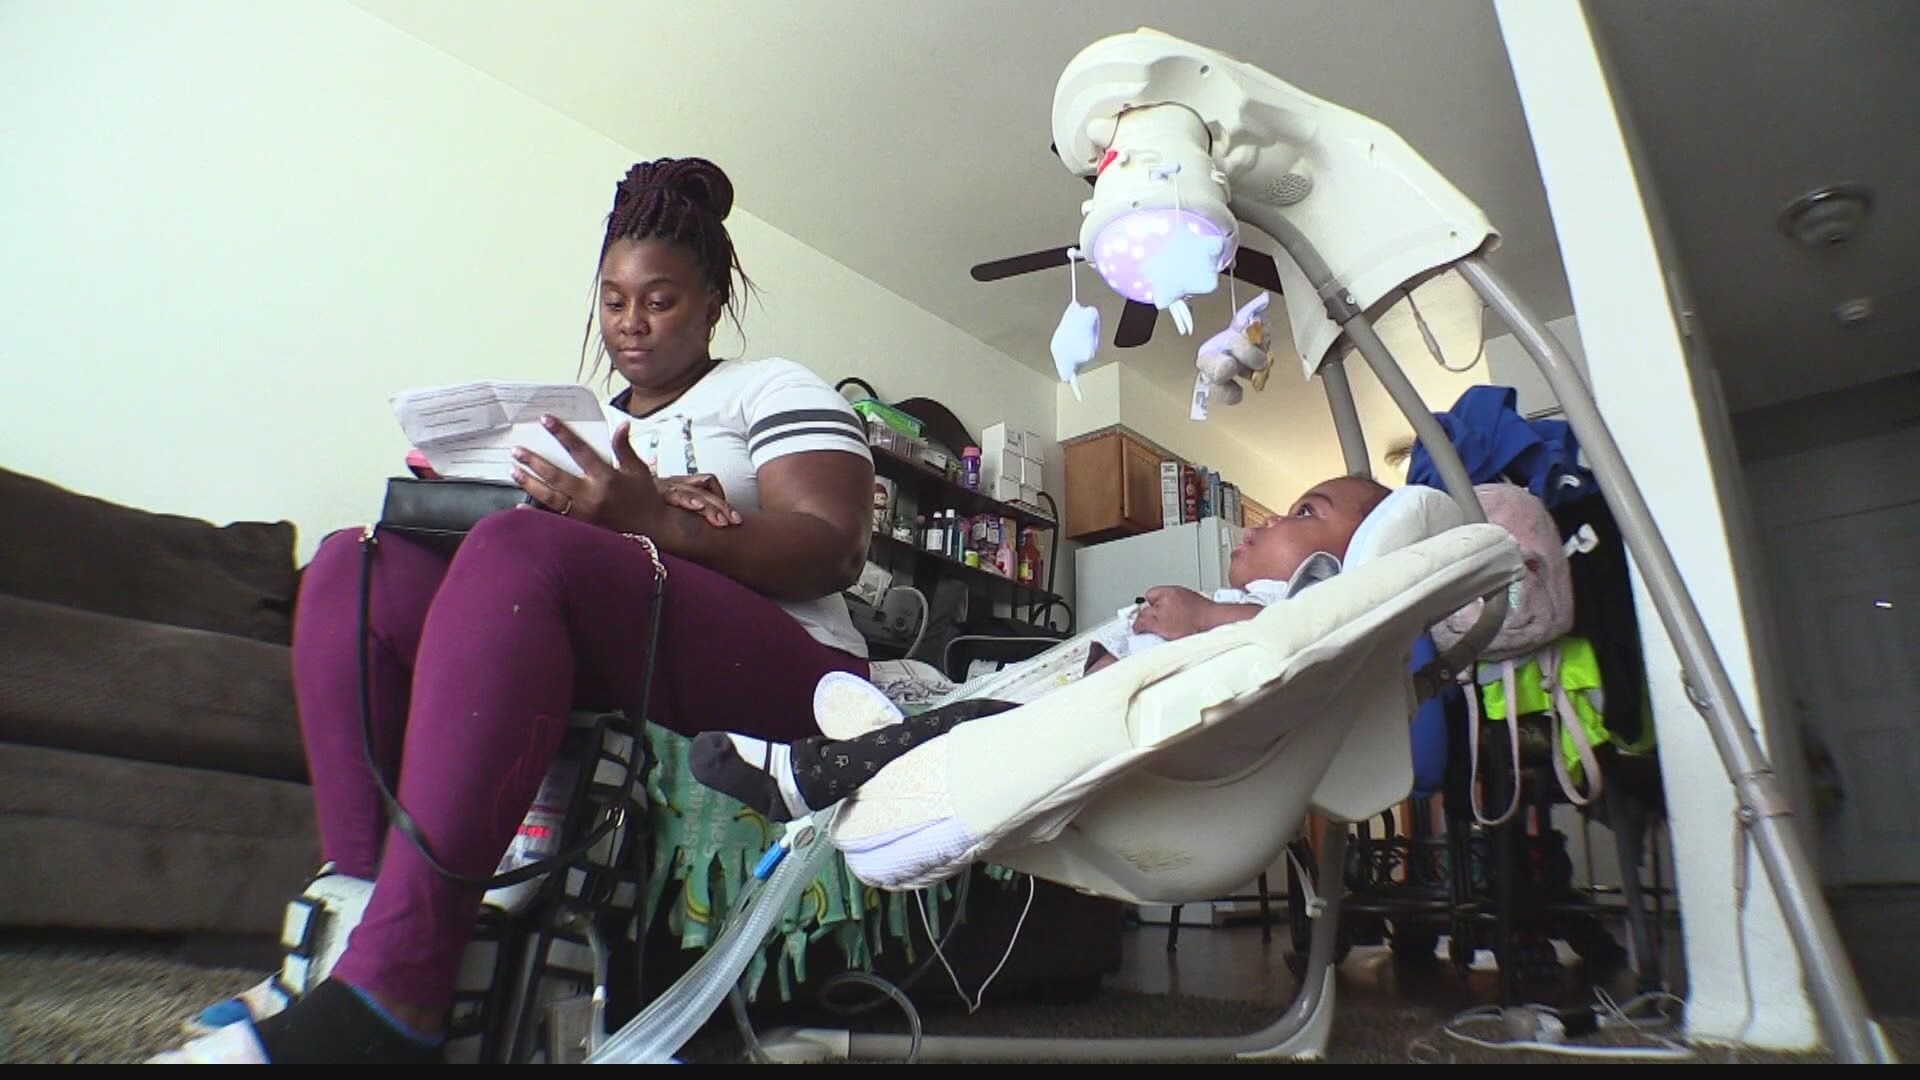 13Investigates revealed the state had failed to provide millions of hours of home nursing care it promised to pay for.